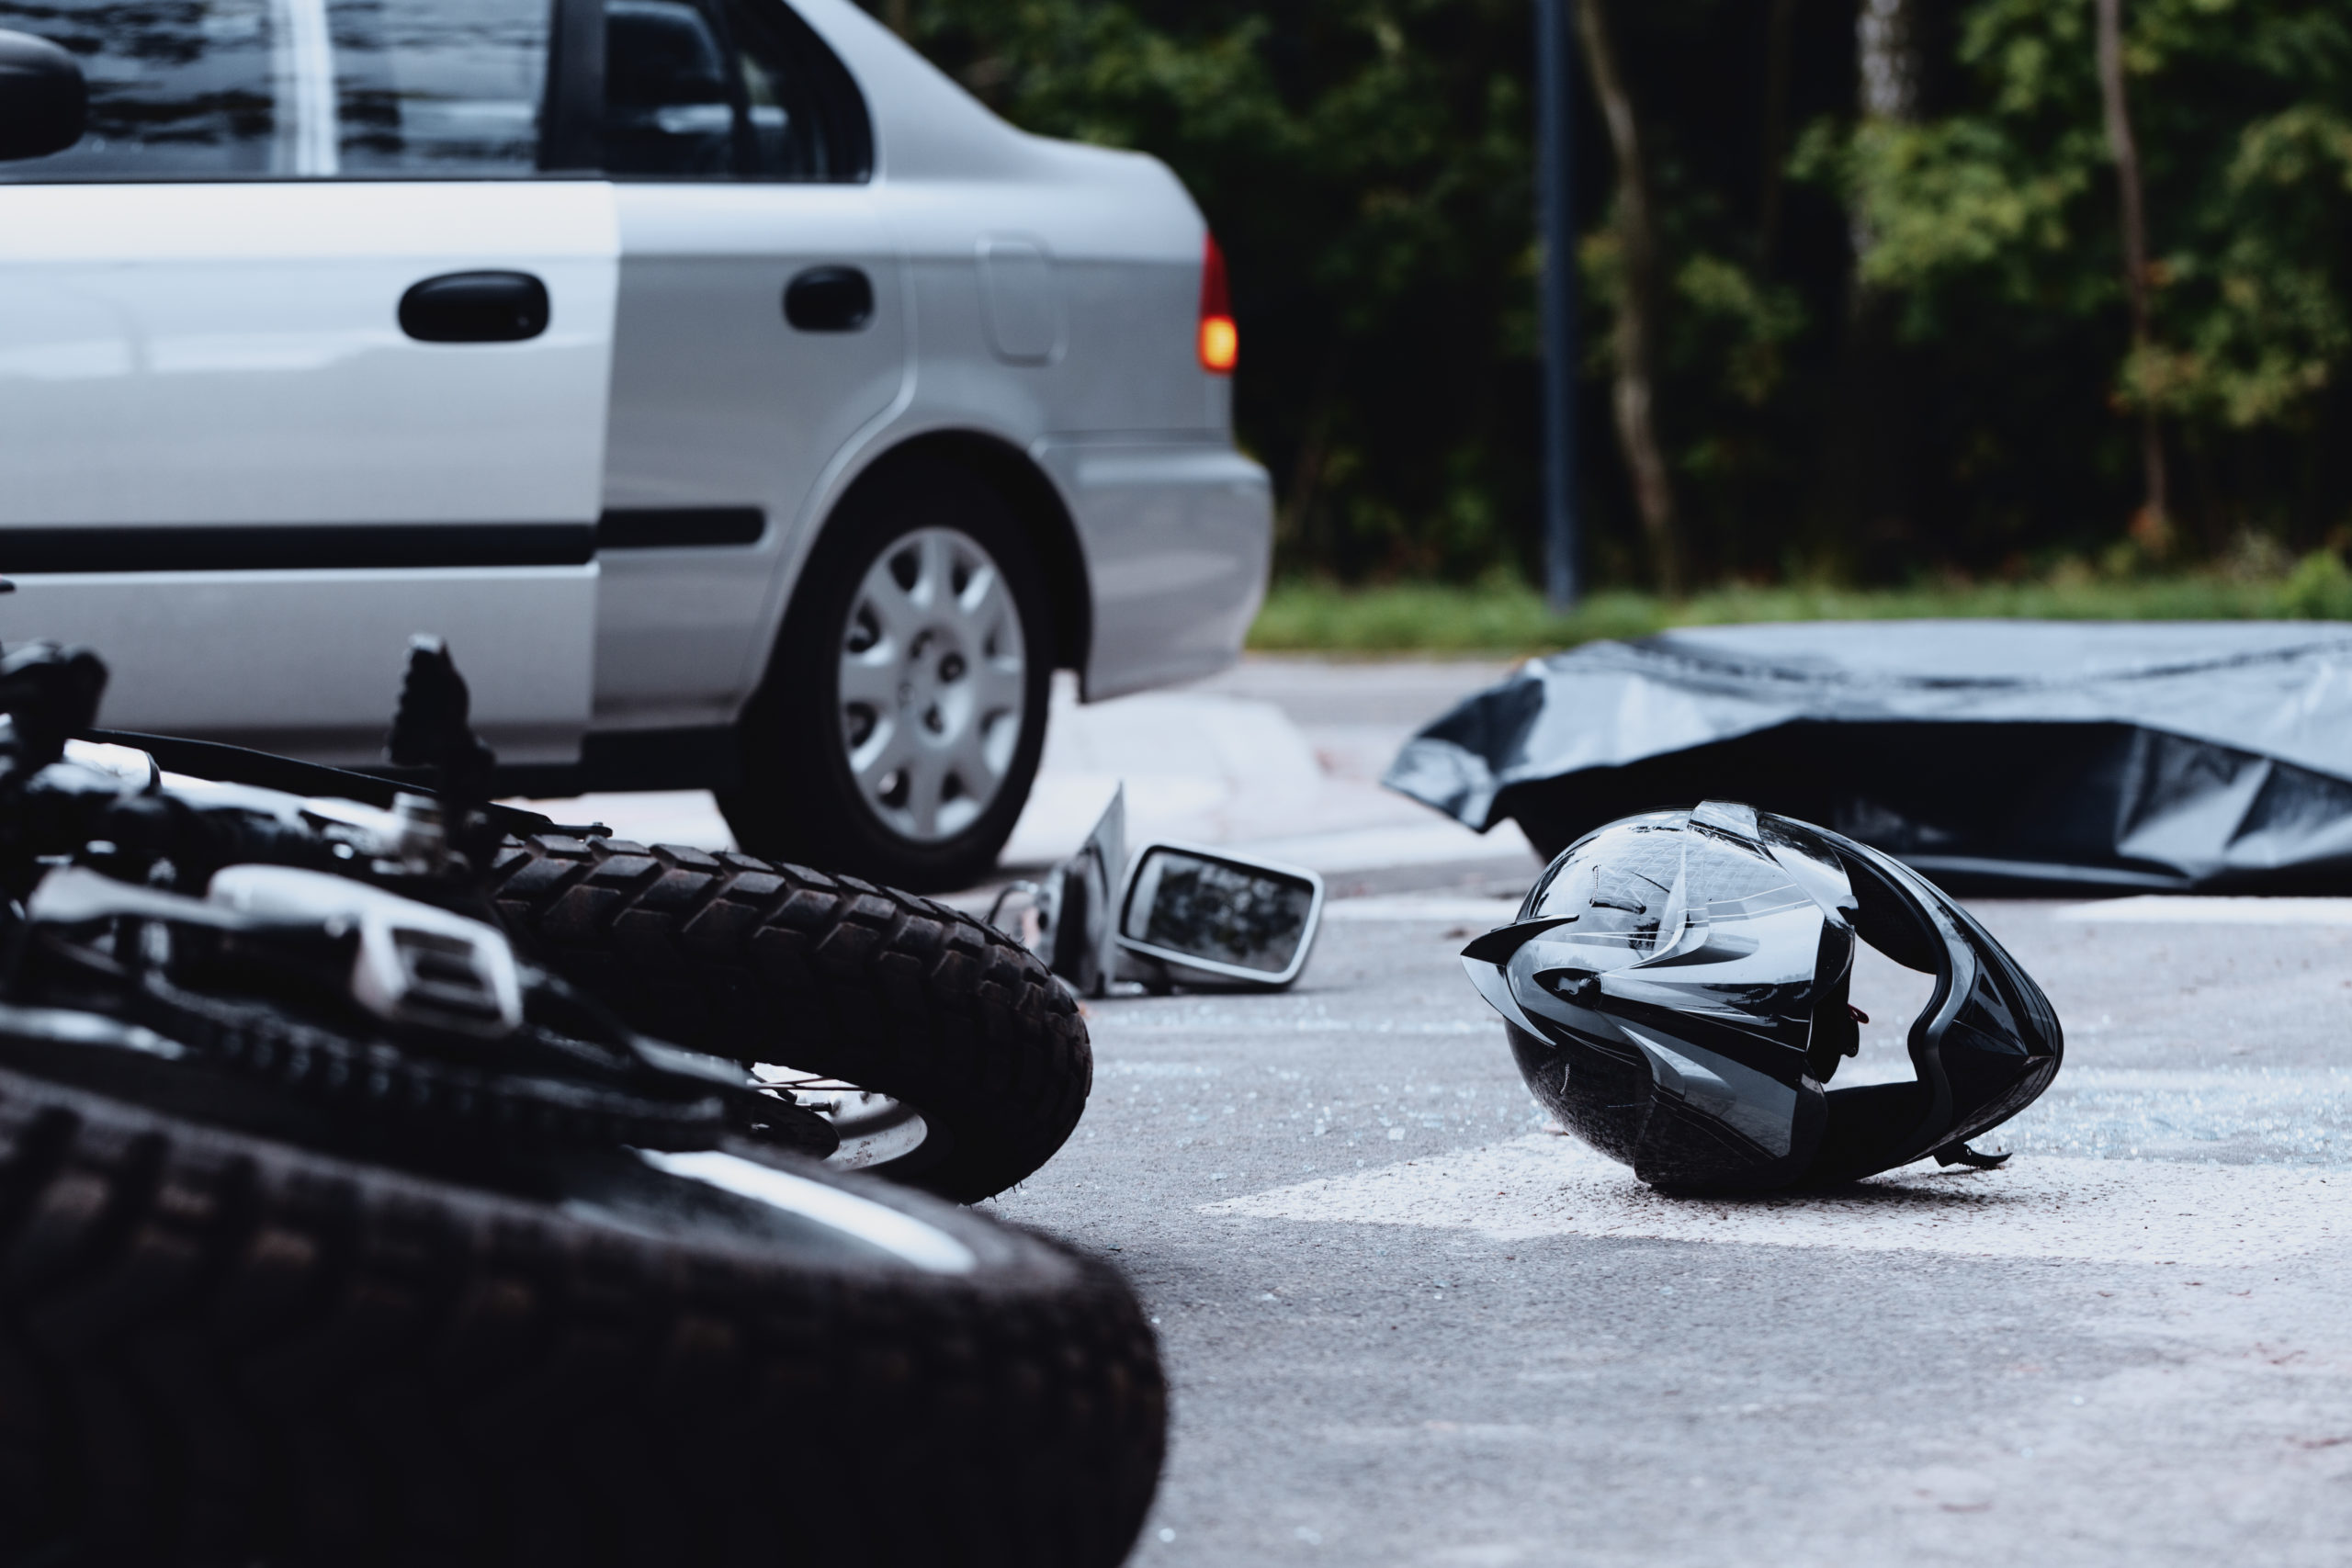 38-year-old Surrey Motorcyclist killed in Langley collision